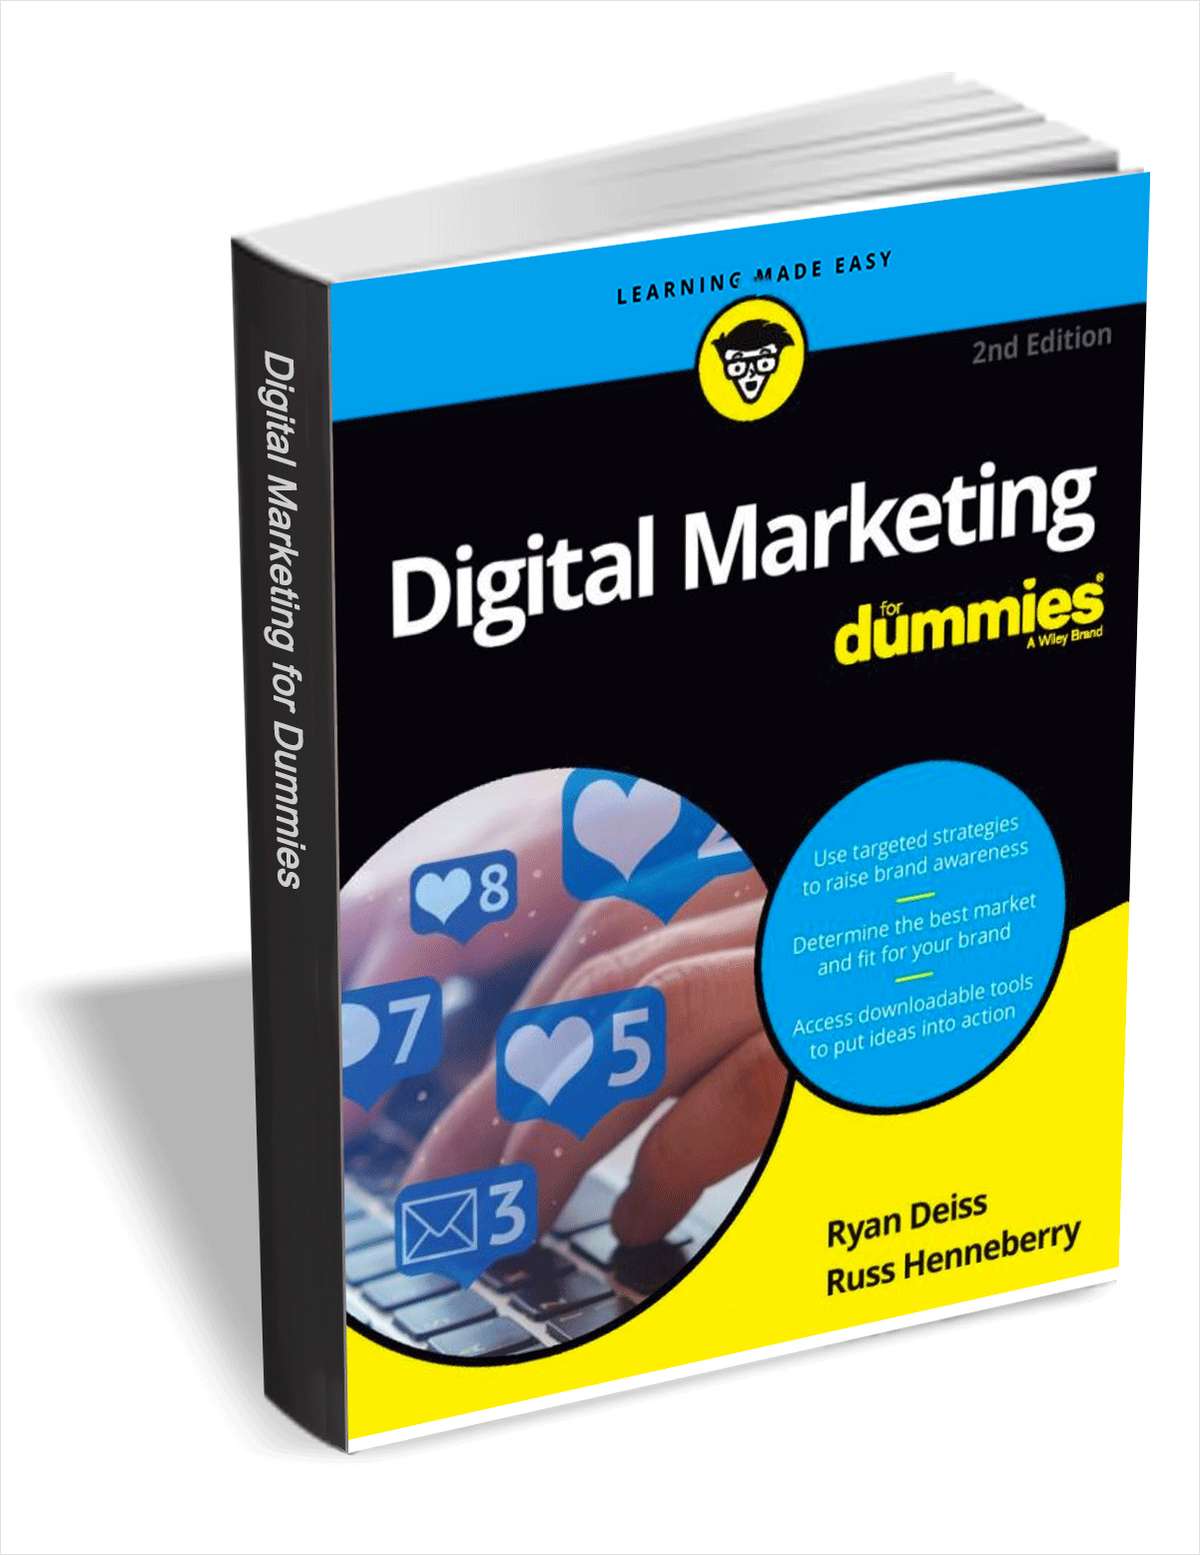 Digital Marketing For Dummies, 2nd Edition ($21.00 Value) FREE for a Limited Time